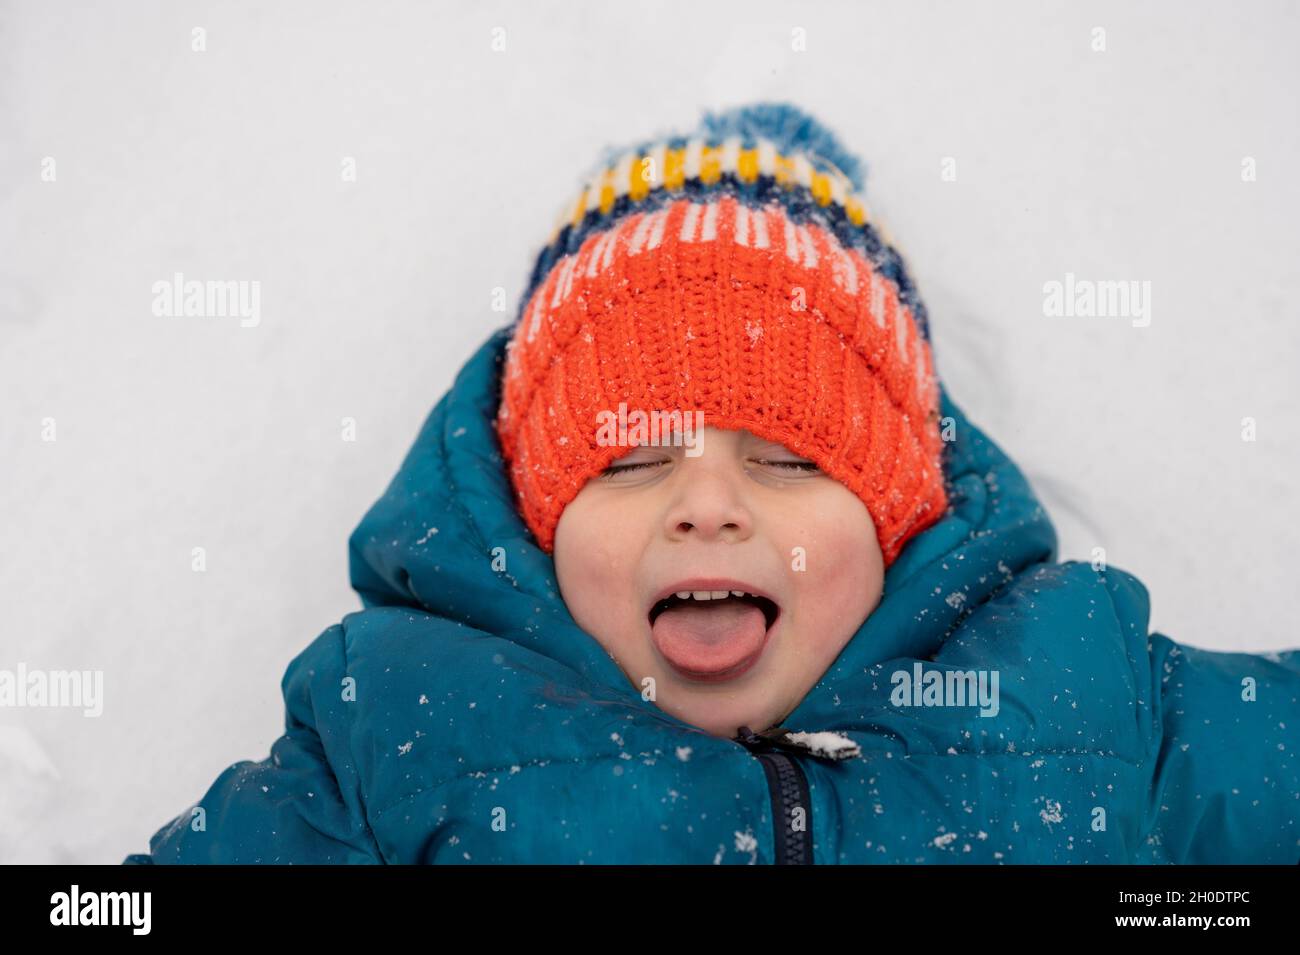 Little boy in knit cap catching snowflakes on his tongue Stock Photo